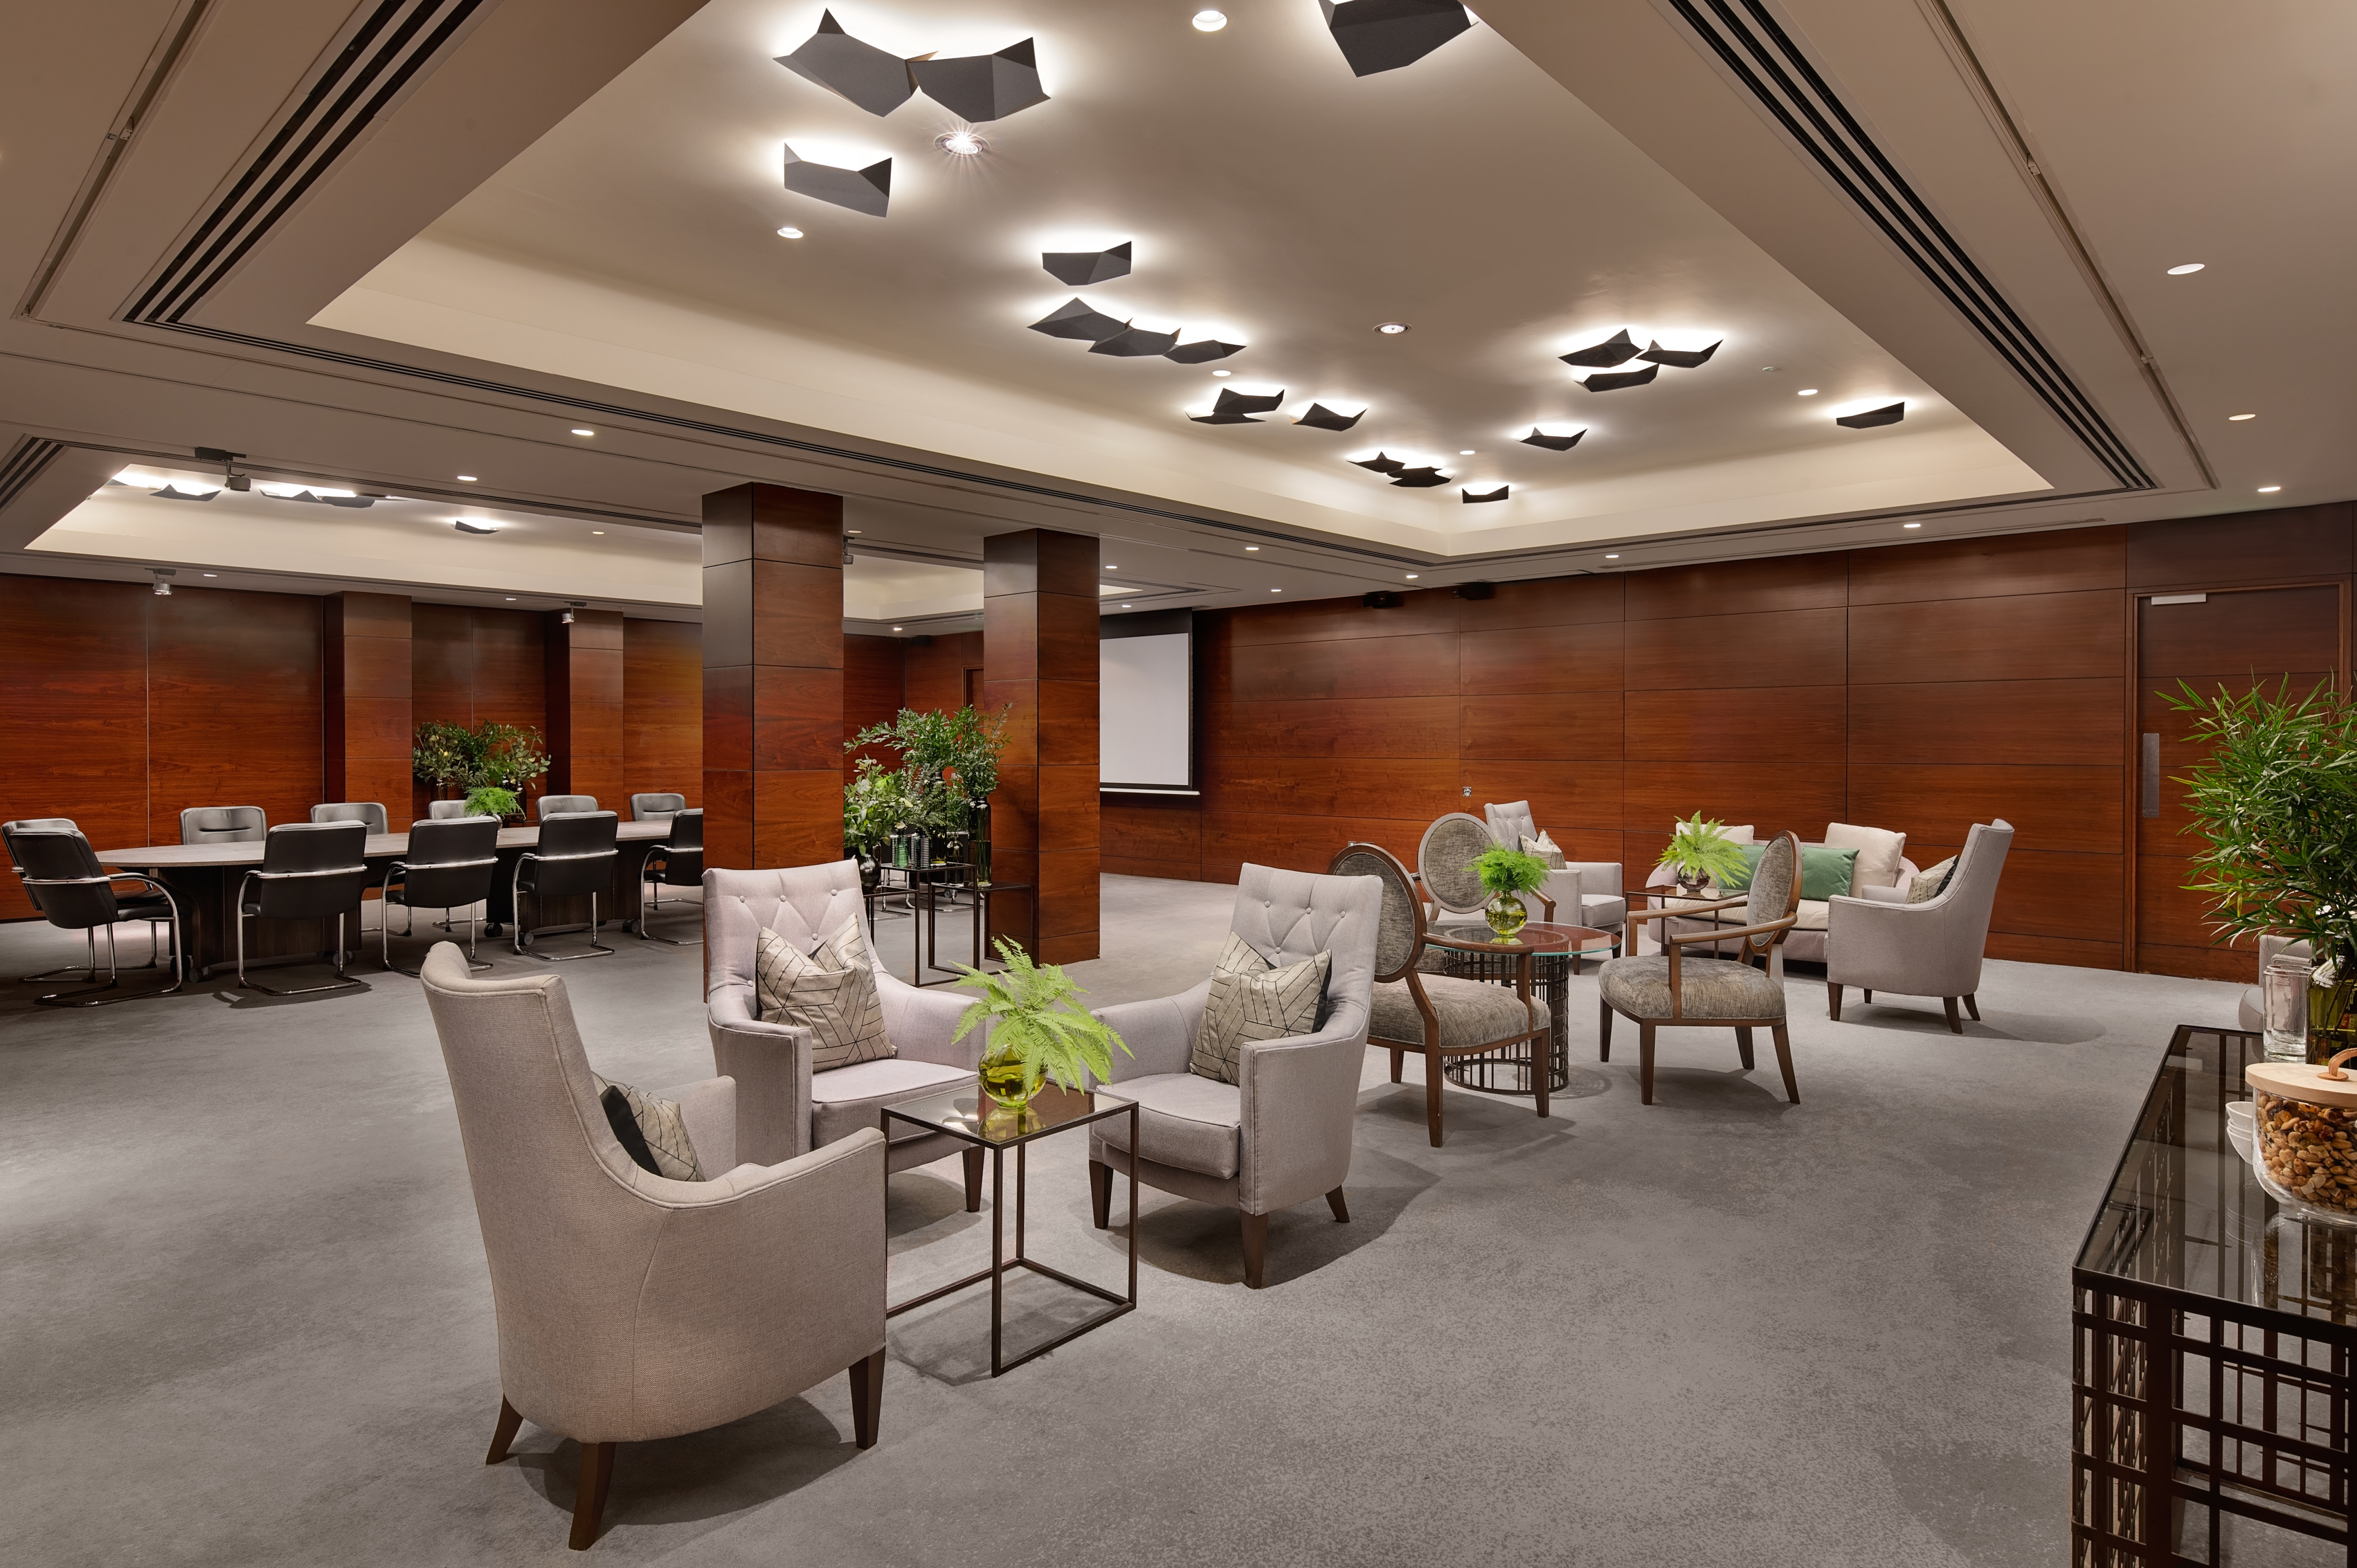 meeting space with lounge area and boardroom table